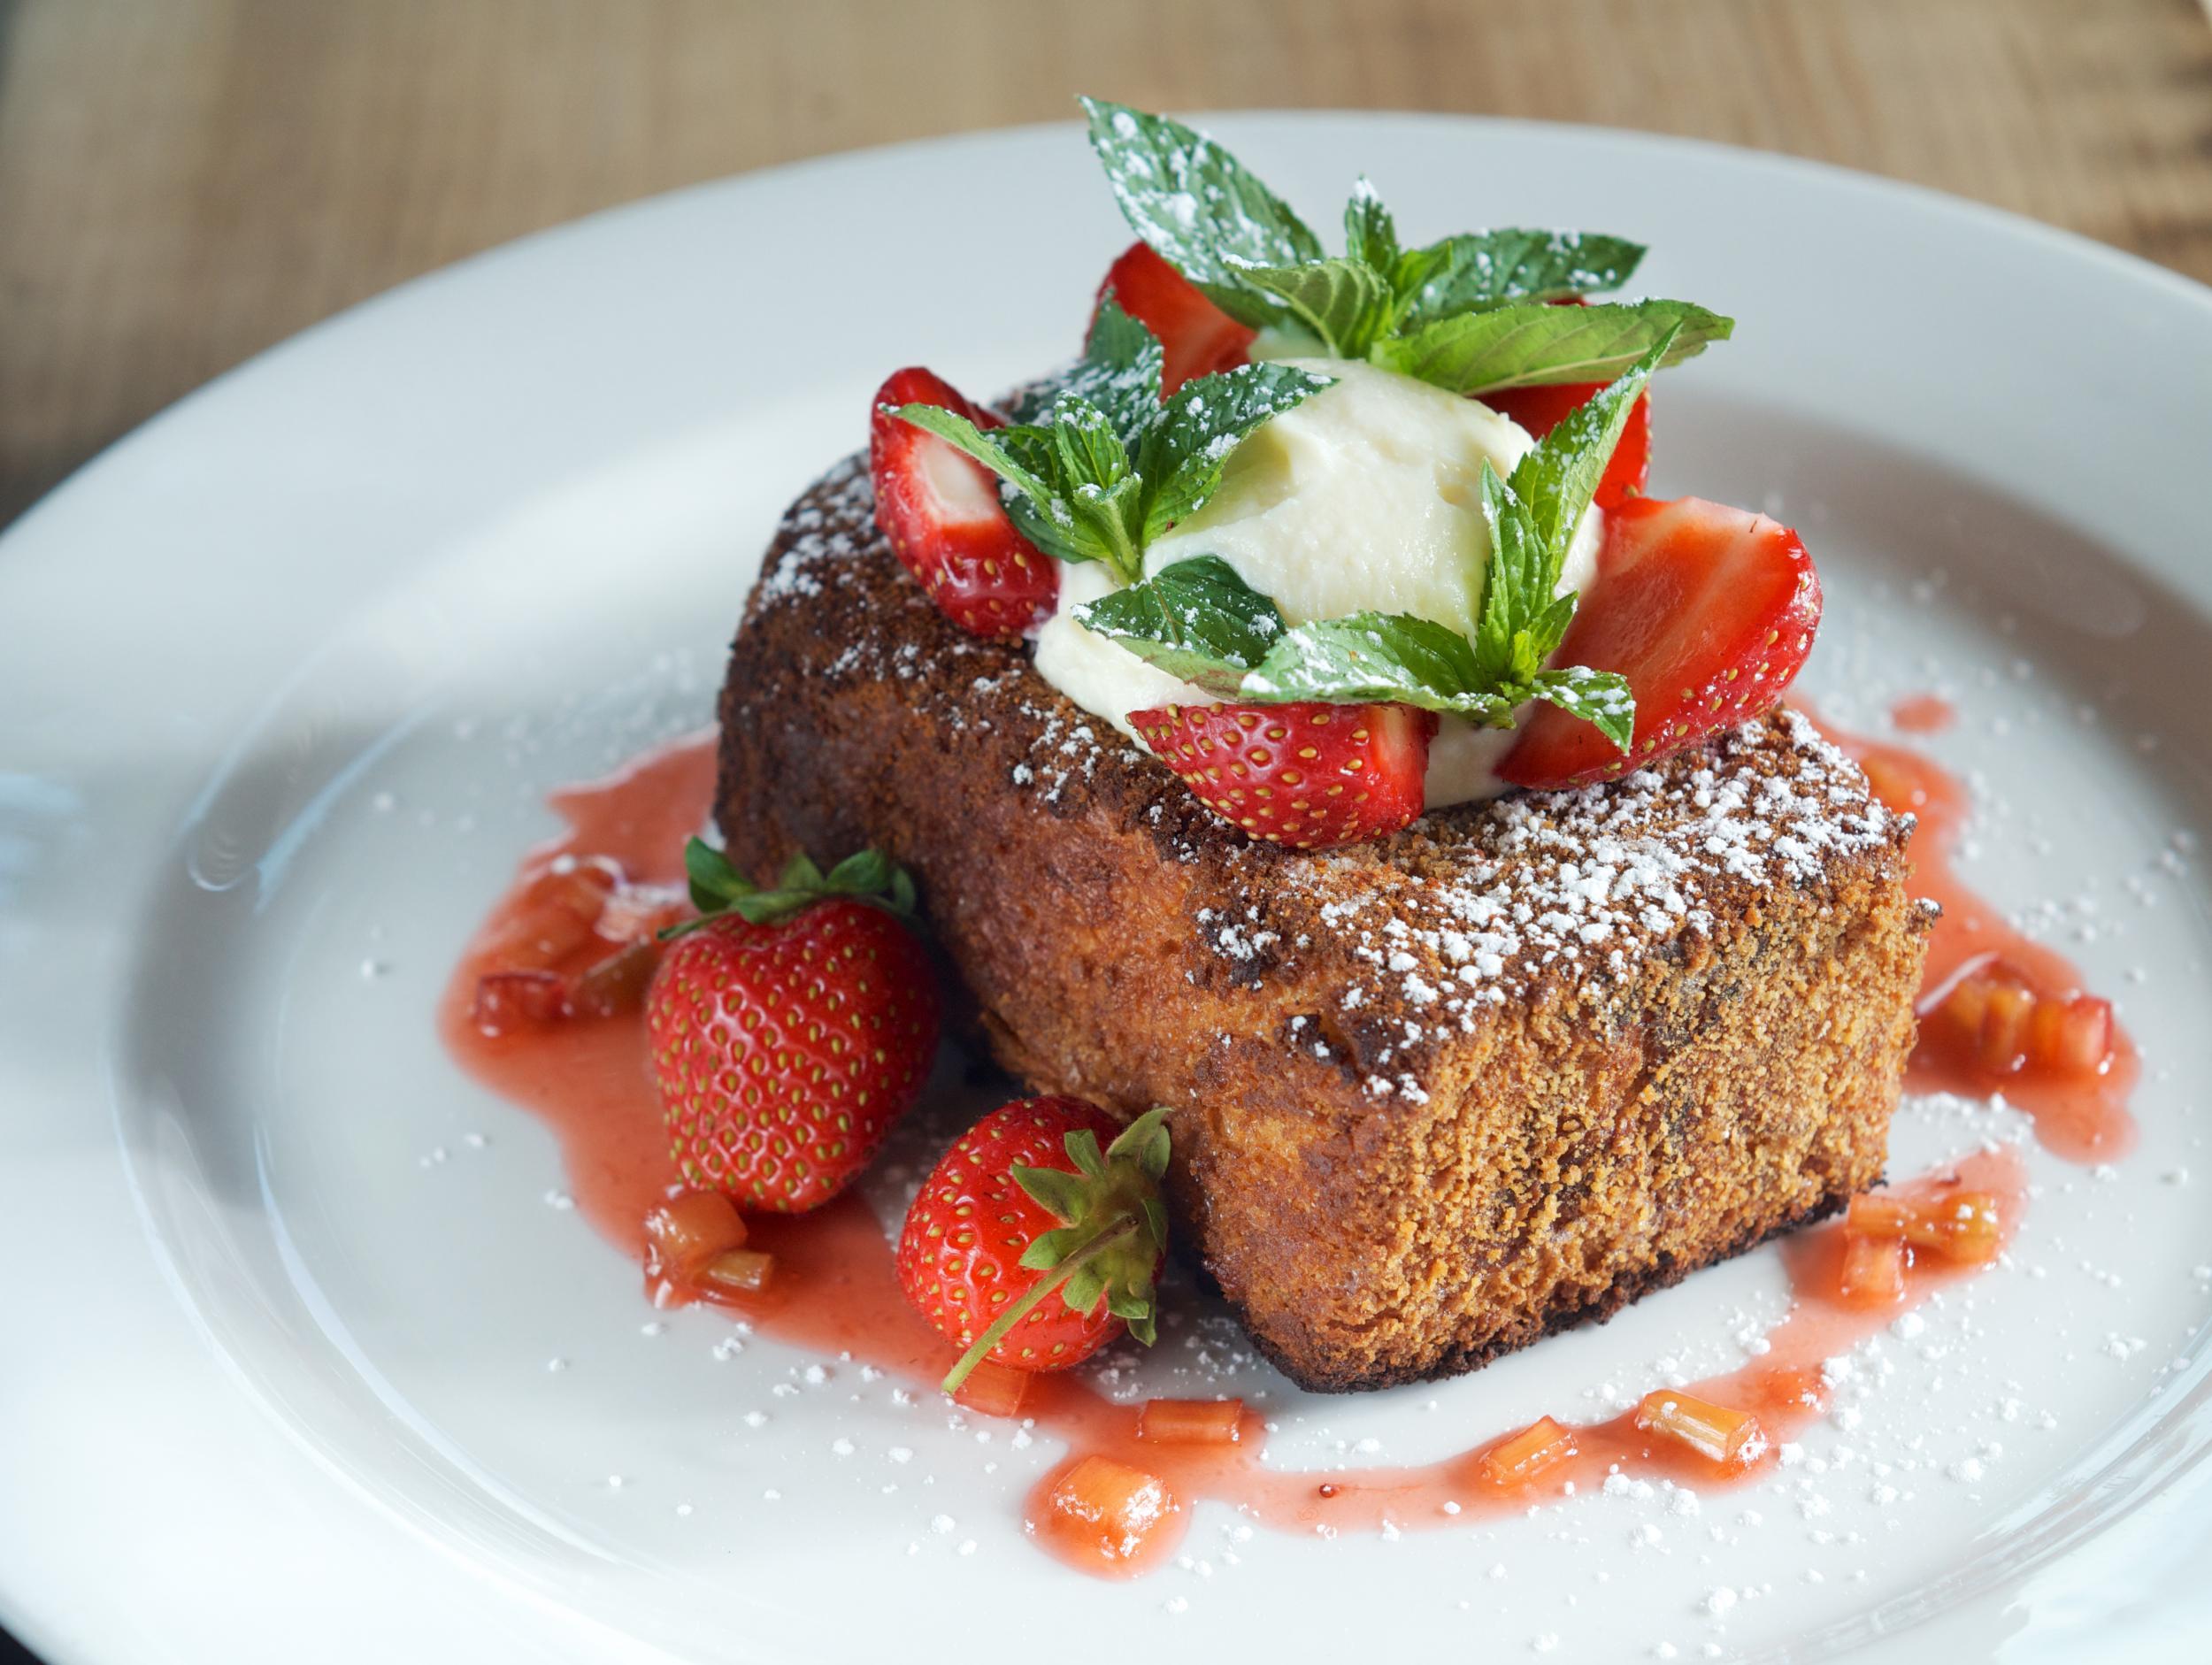 French toast, Boston-style: Graham cracker crusted challah with Amaretto Chantilly and toasted almonds